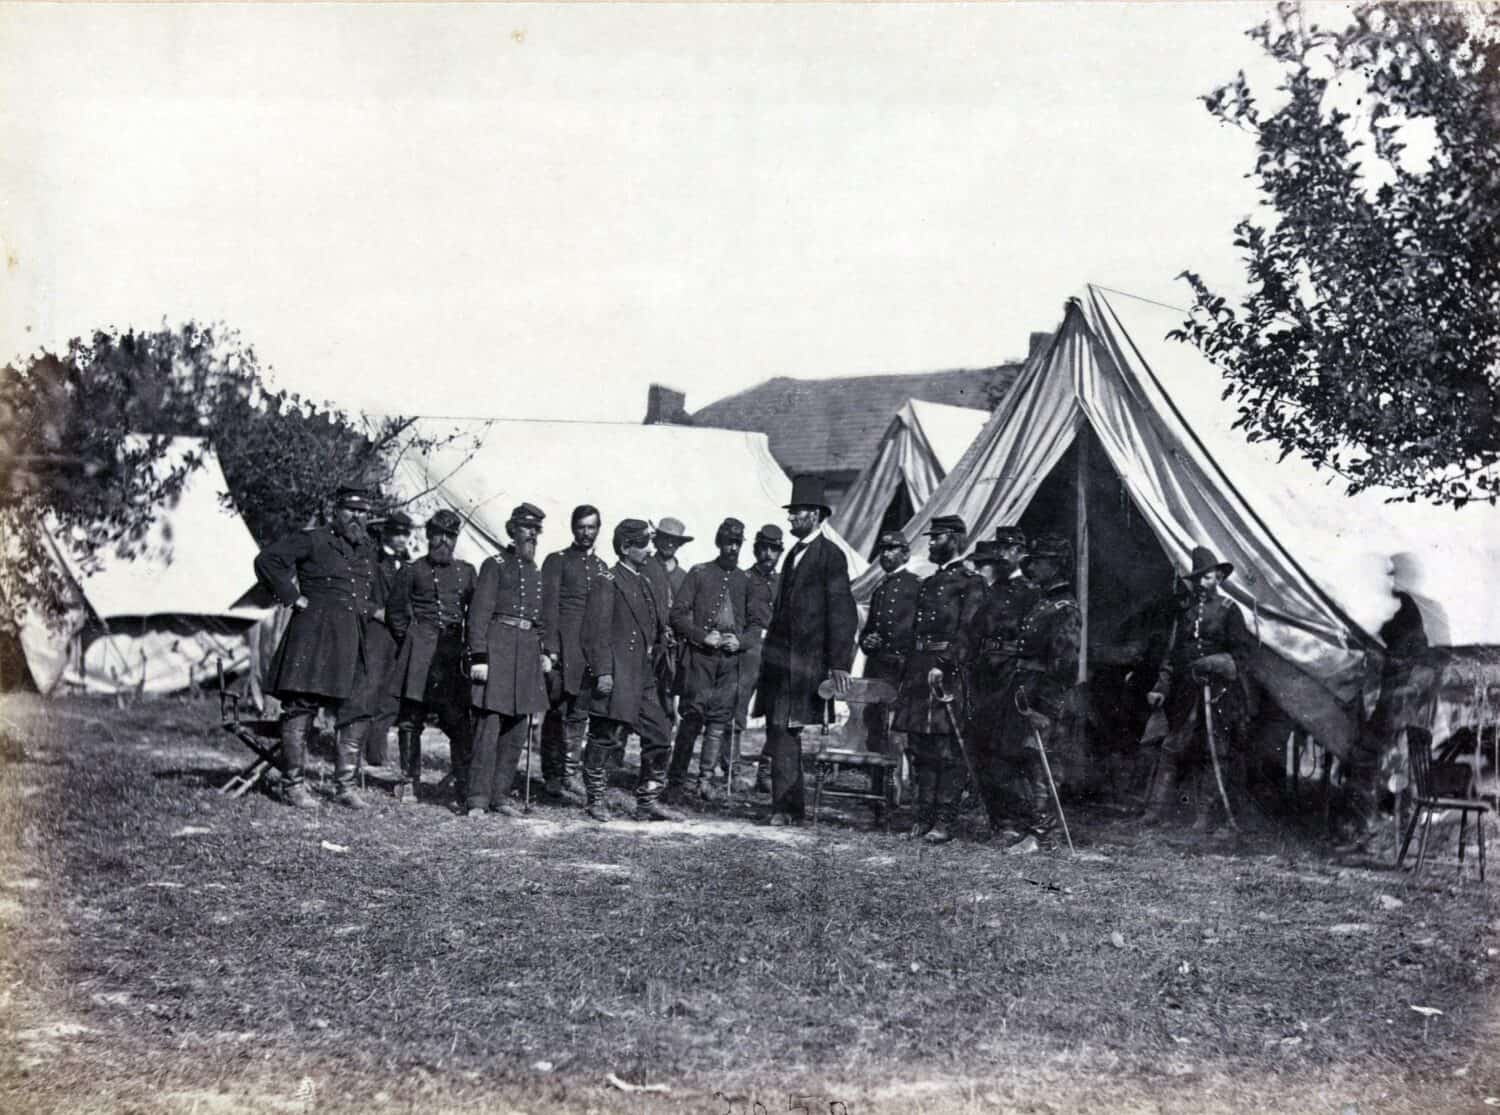 President Lincoln (1809-1865) on battle-field of Antietam with several officers outside tent.